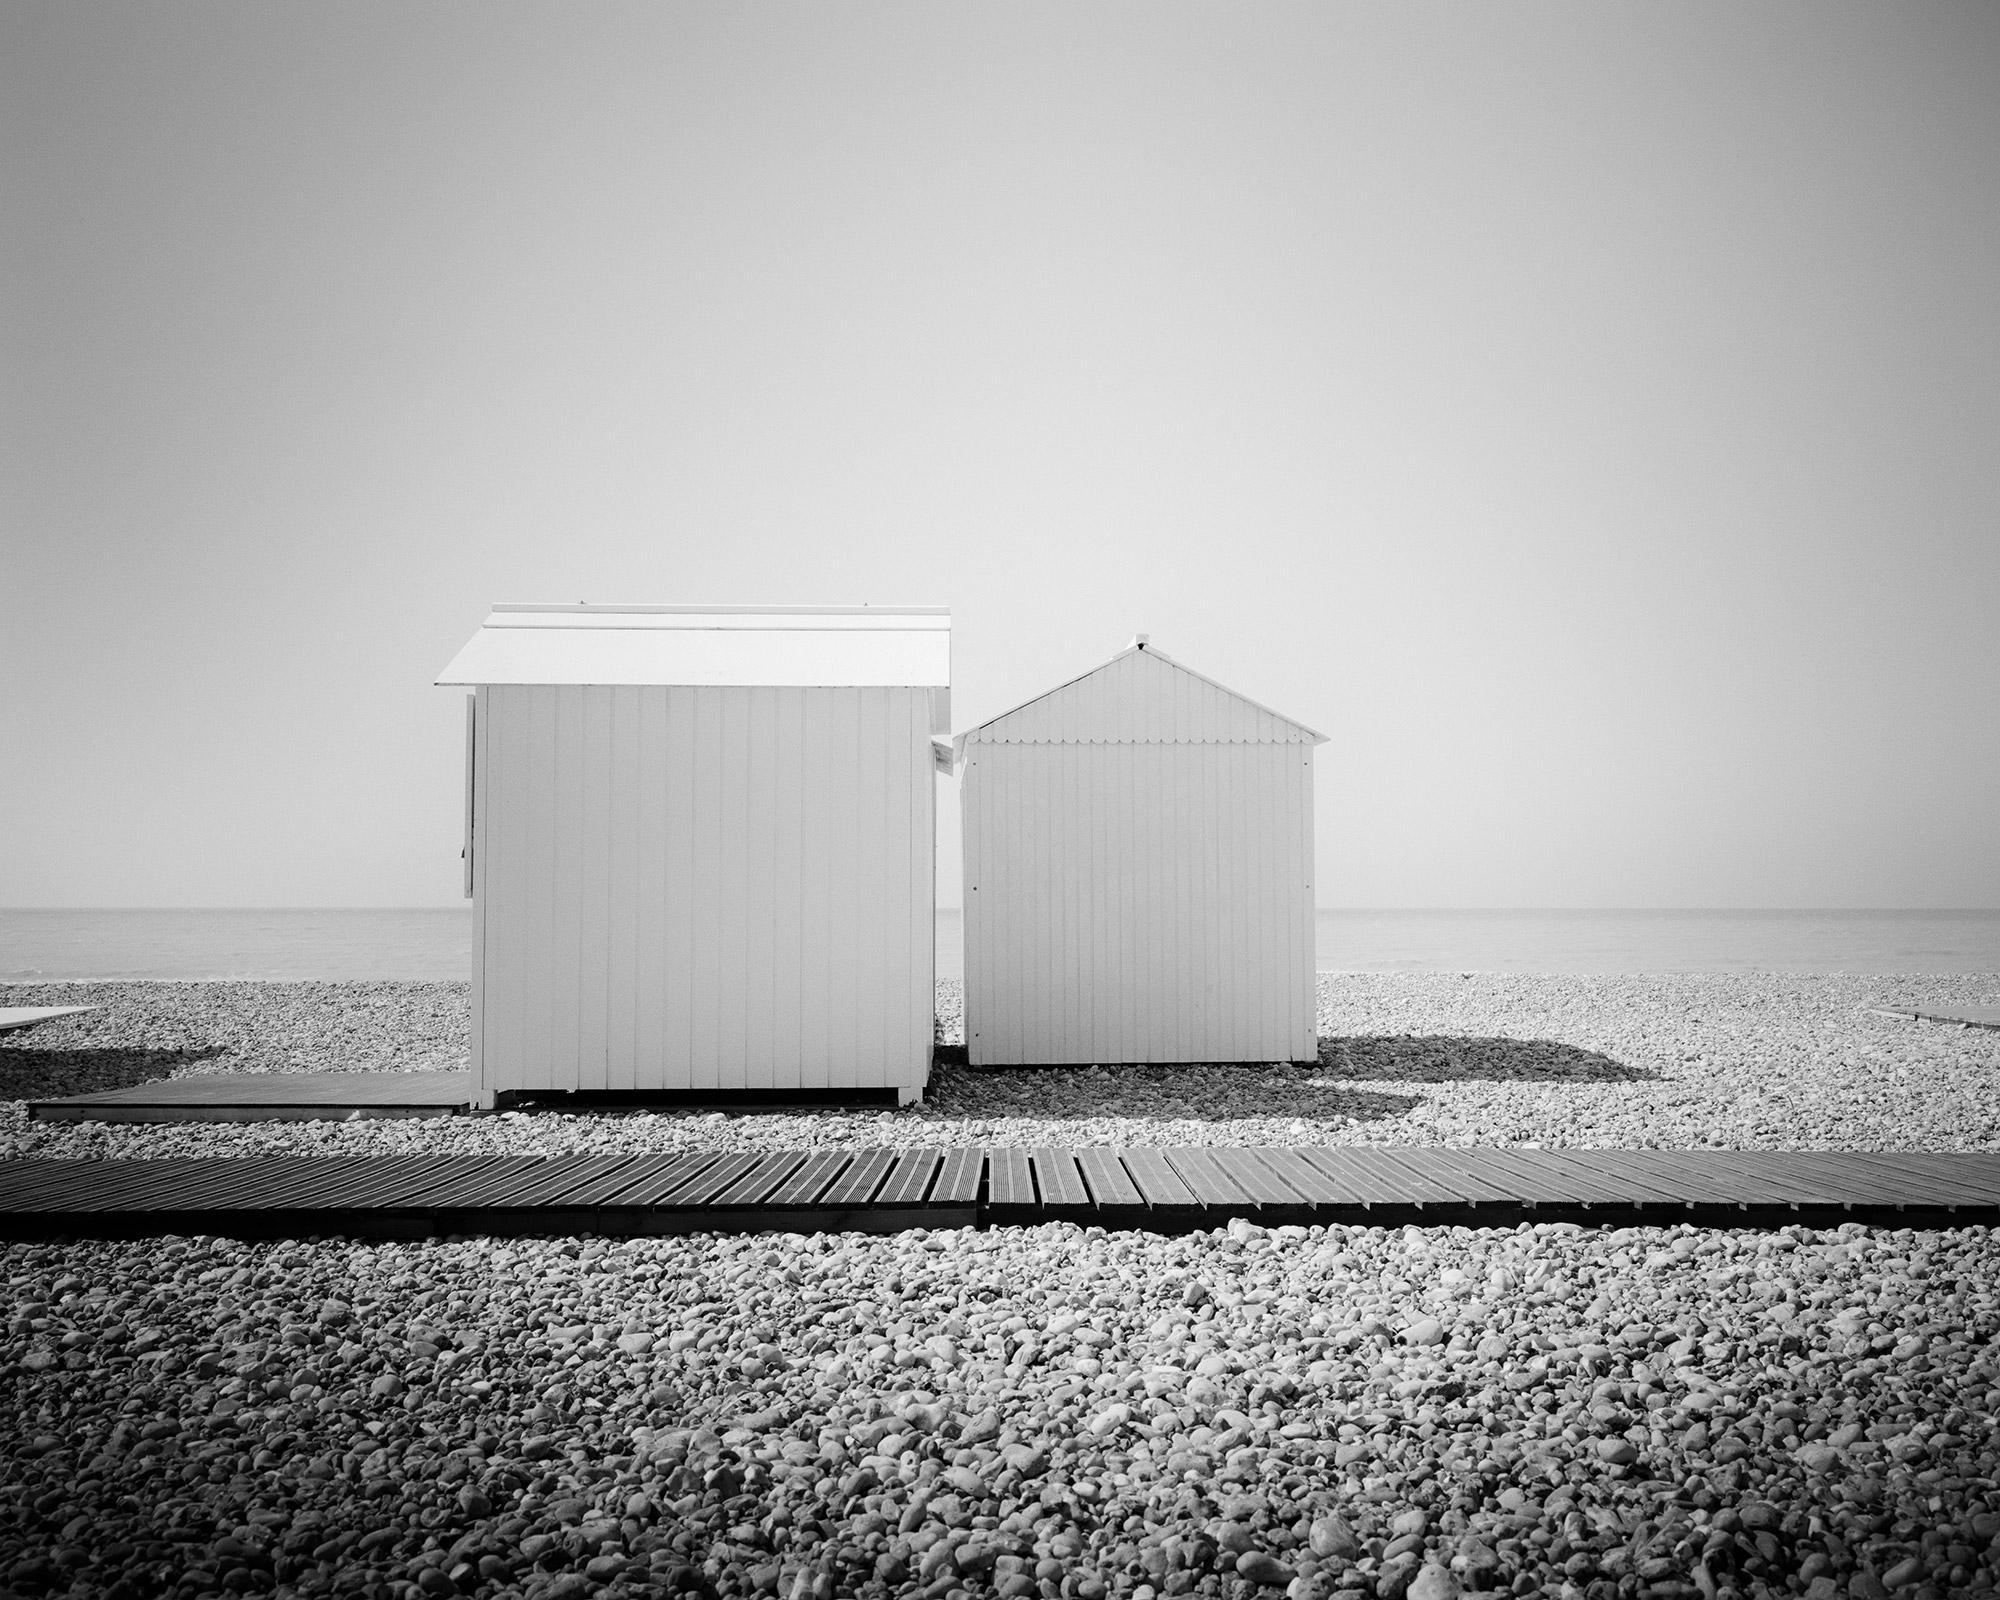 Gerald Berghammer Black and White Photograph - Esplanade, Beach Huts, Normandie, France, black and white landscape photography